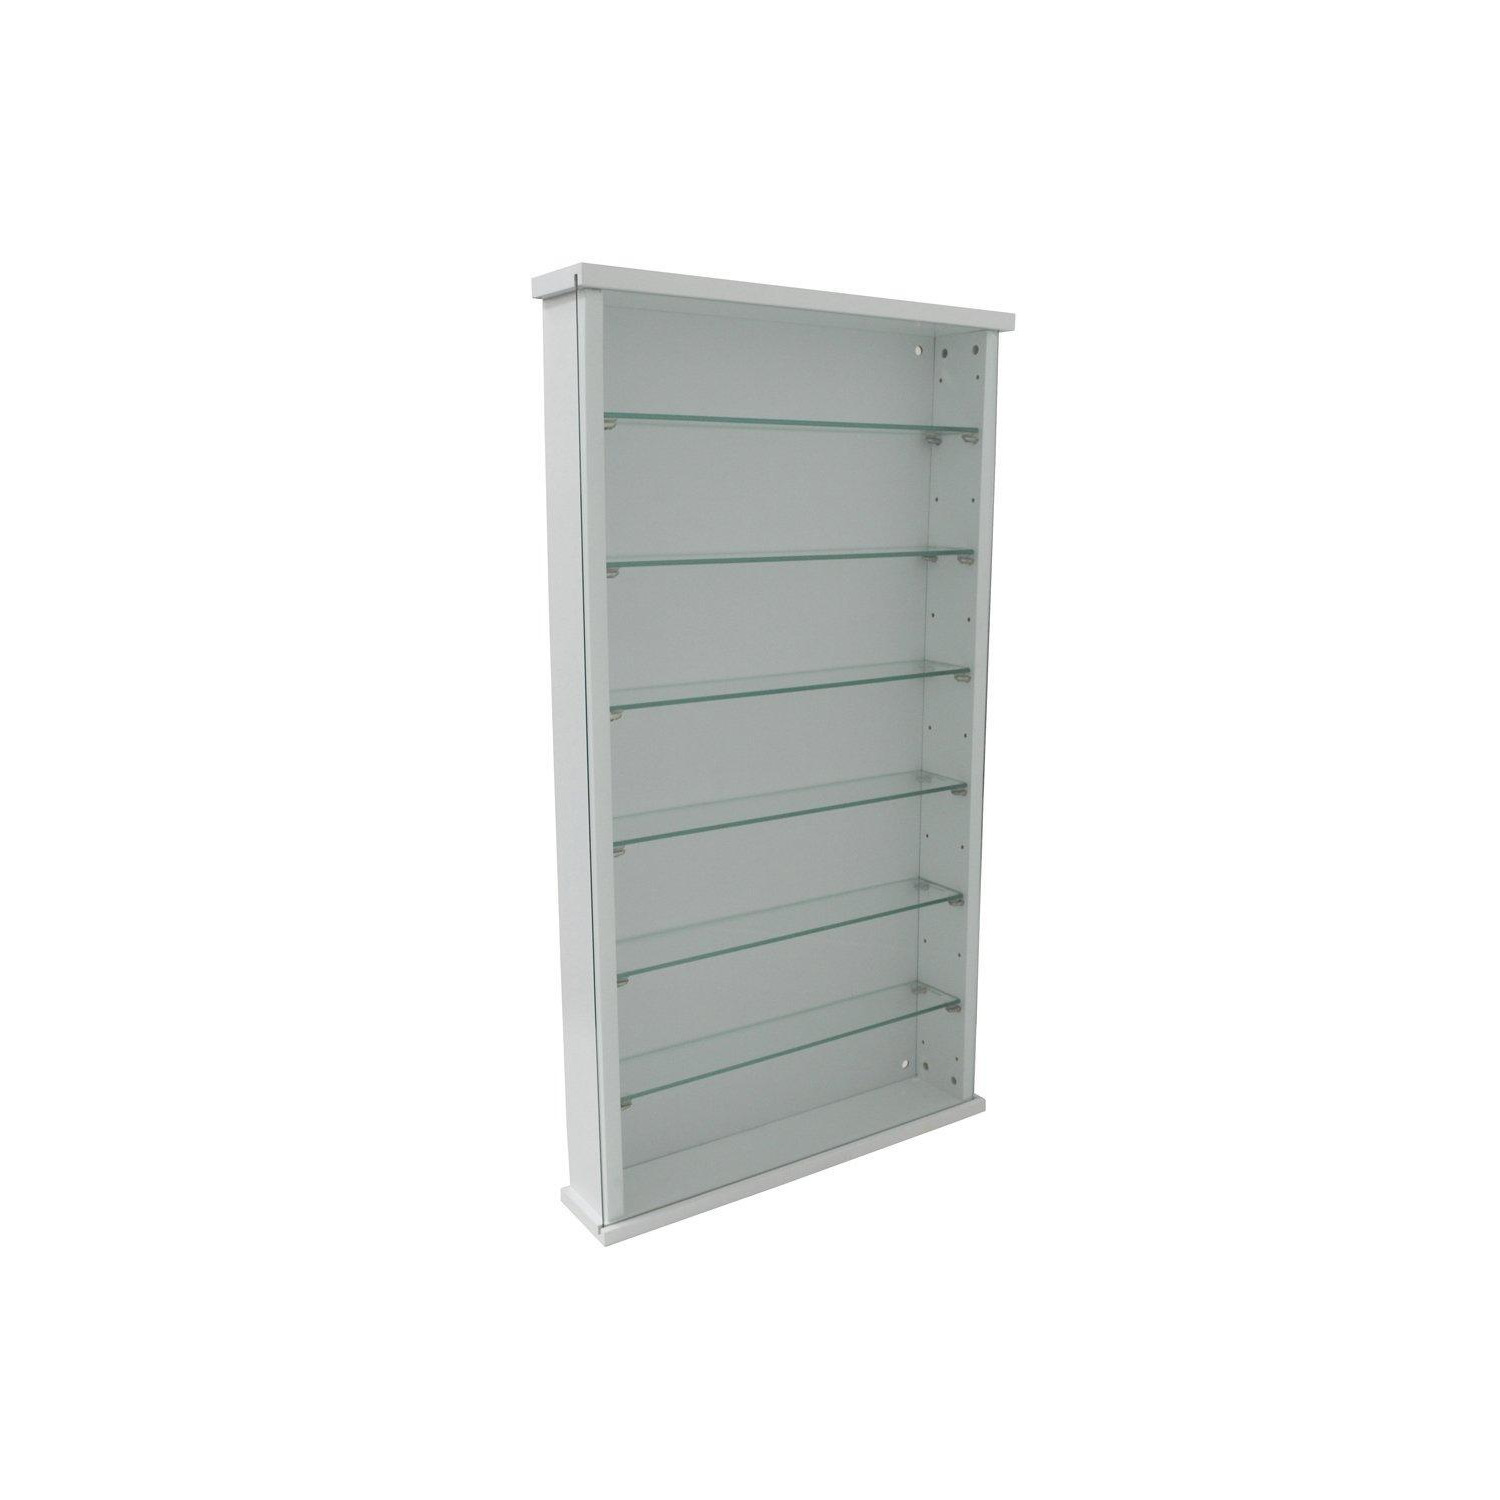 'Exhibit'  Solid Wood 6 Shelf Glass Wall Display Cabinet  White - image 1